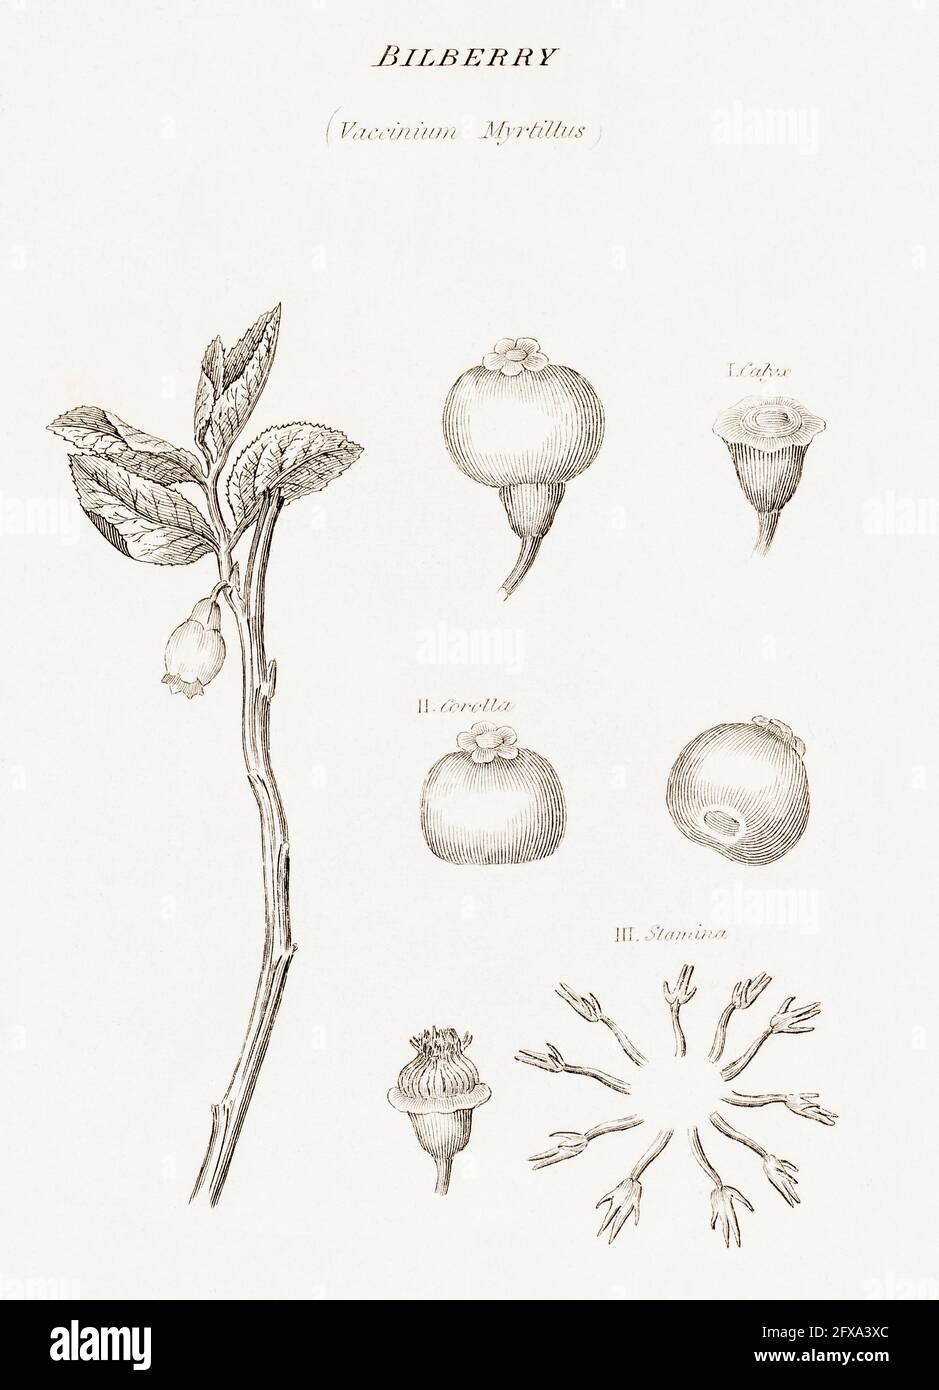 Copperplate botanical illustration of Bilberry / Vaccinium myrtillus from Robert Thornton's British Flora, 1812. Used as food & once for medicine cure Stock Photo